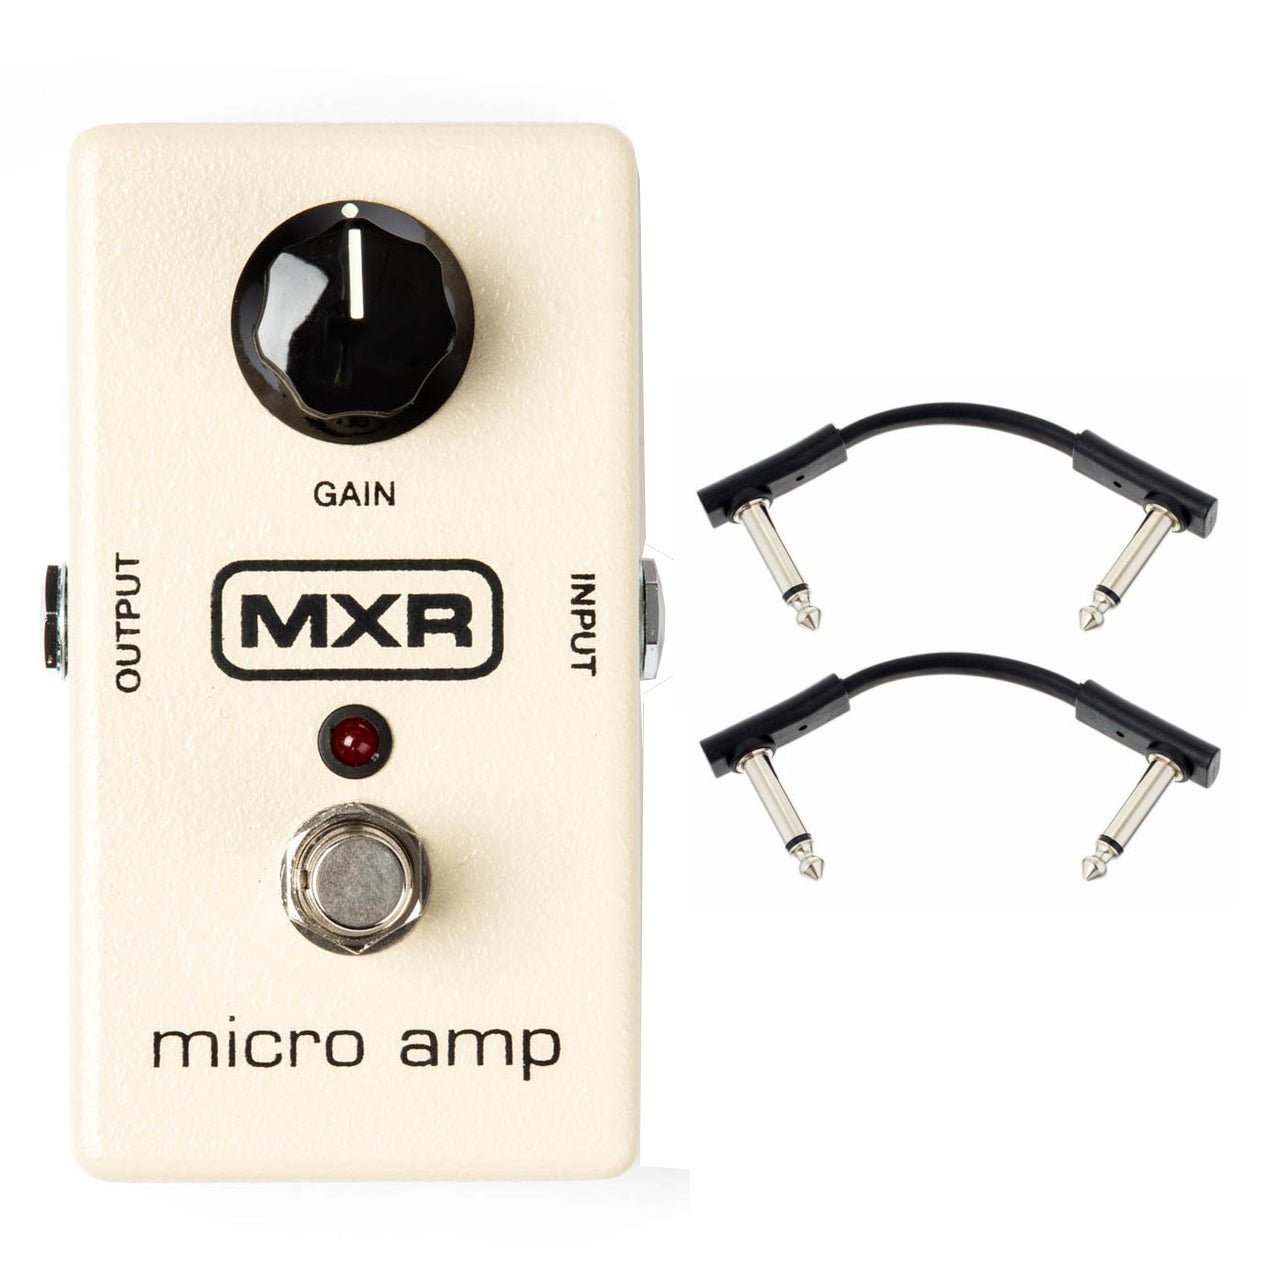 Dunlop MXR M133 Micro Amp Boost Guitar Effect Pedal + 2 FREE Warwick Patch Cables